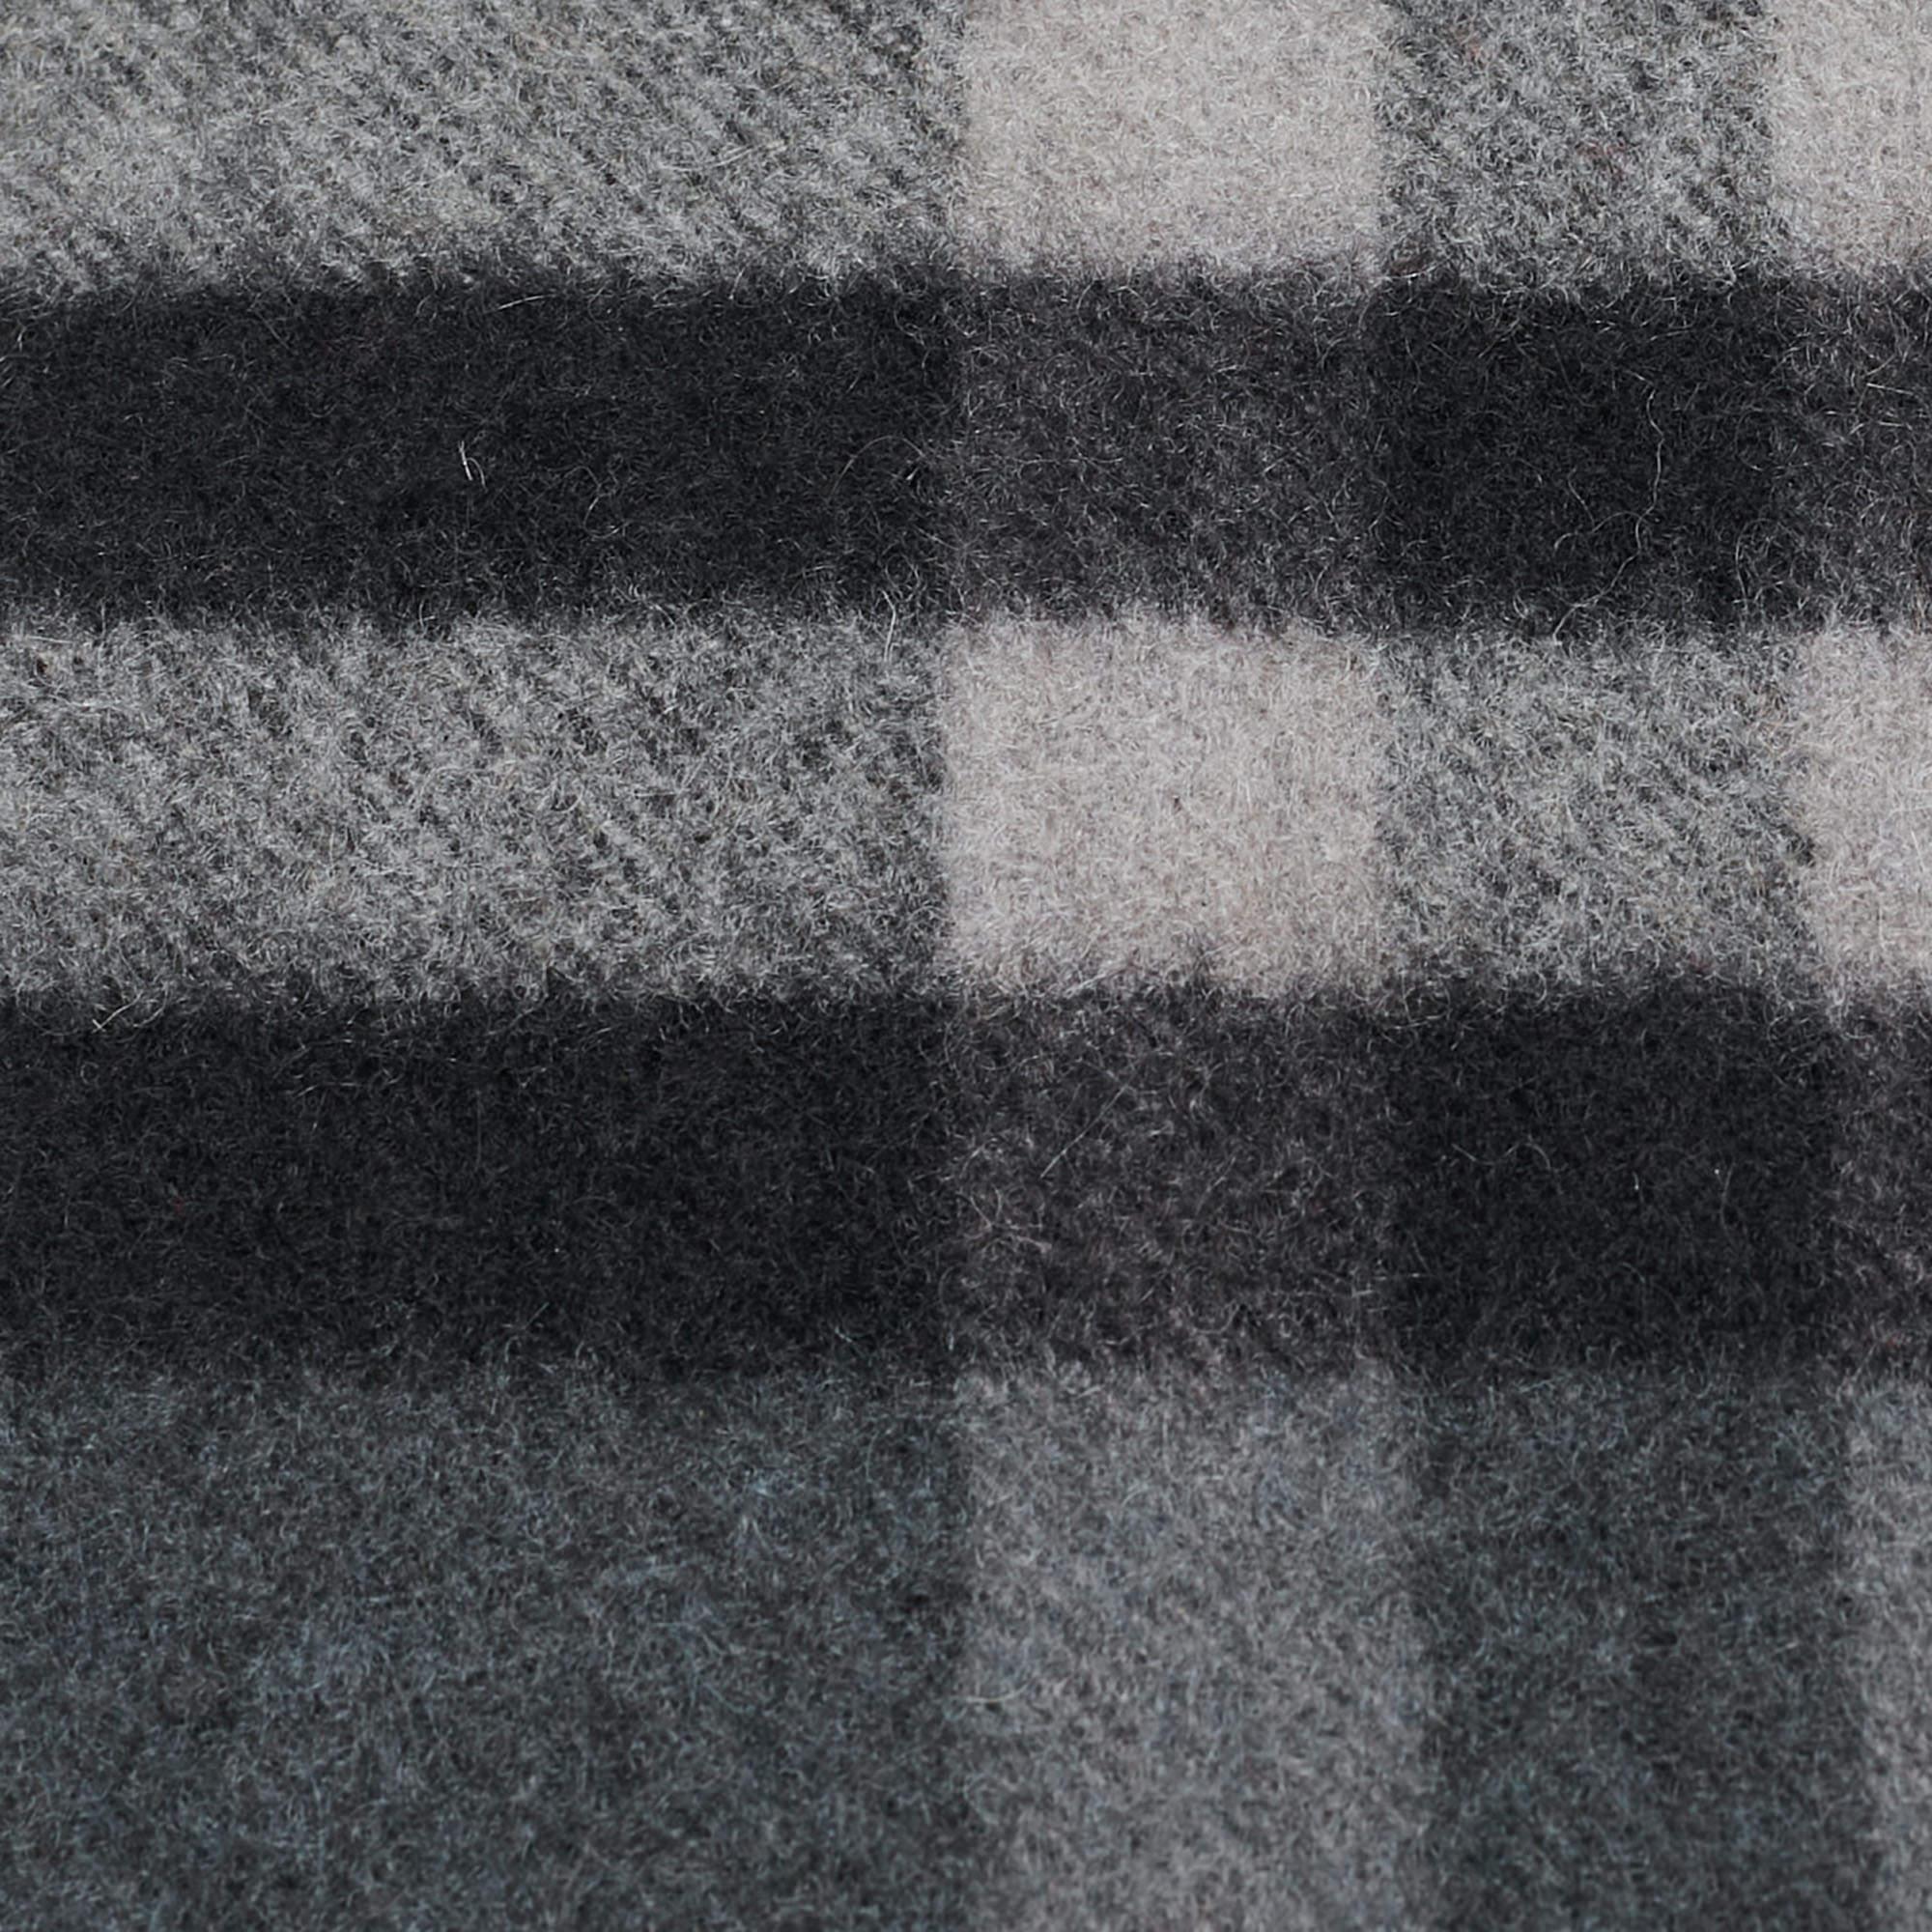 Women's Burberry Grey Check Patterned Cashmere Fringed Scarf